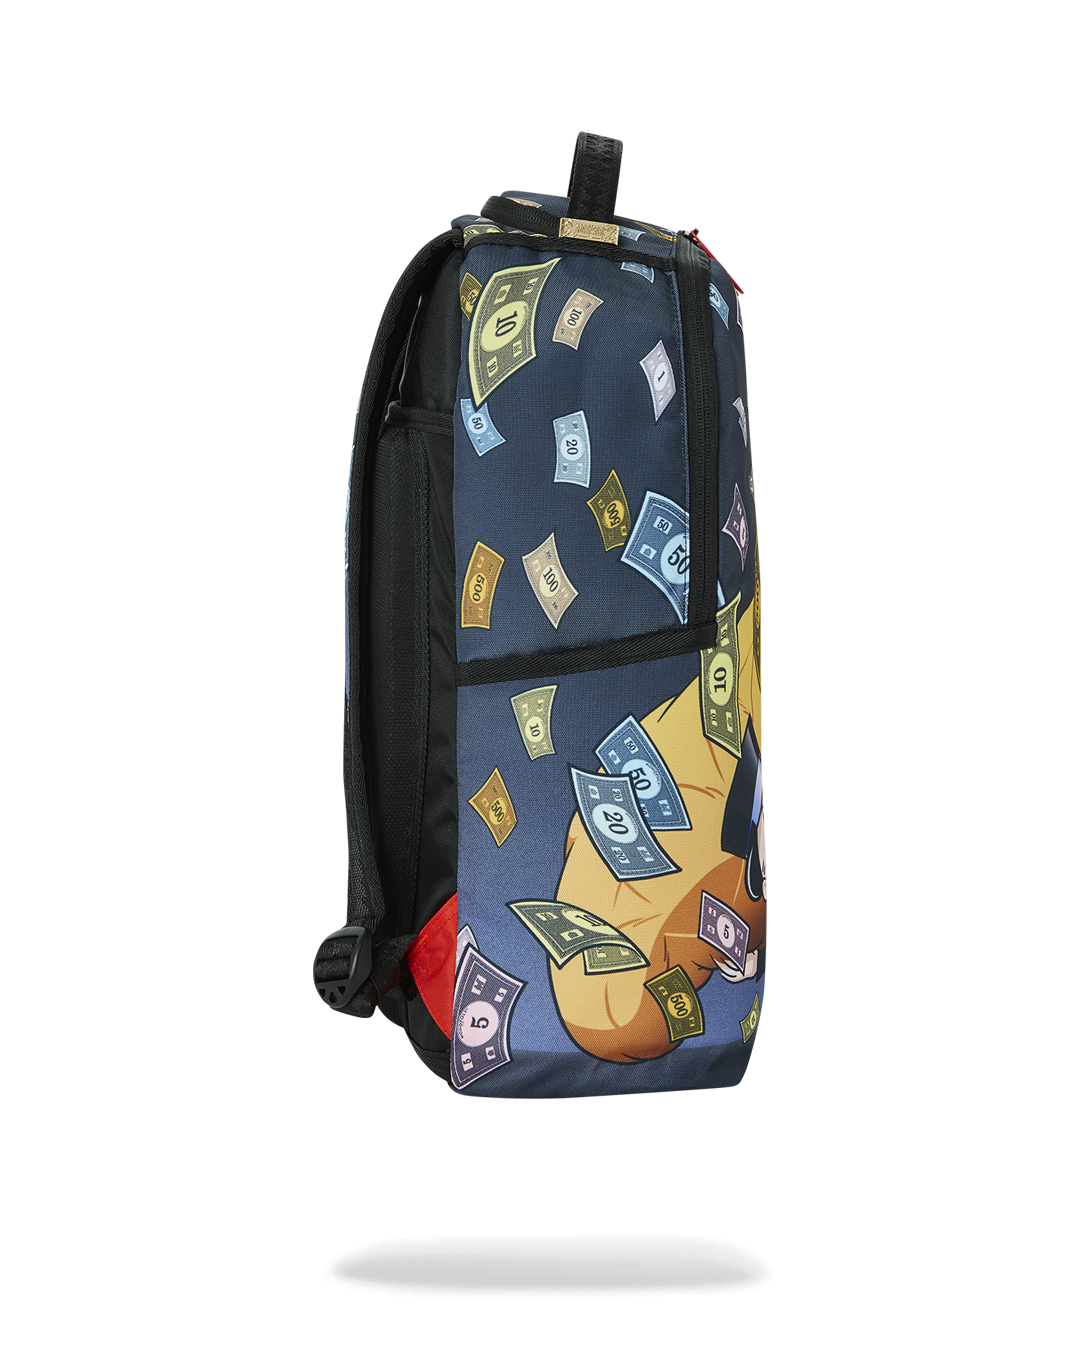 SPRAYGROUND® BACKPACK MONOPOLY HEAVYBAGS BACKPACK